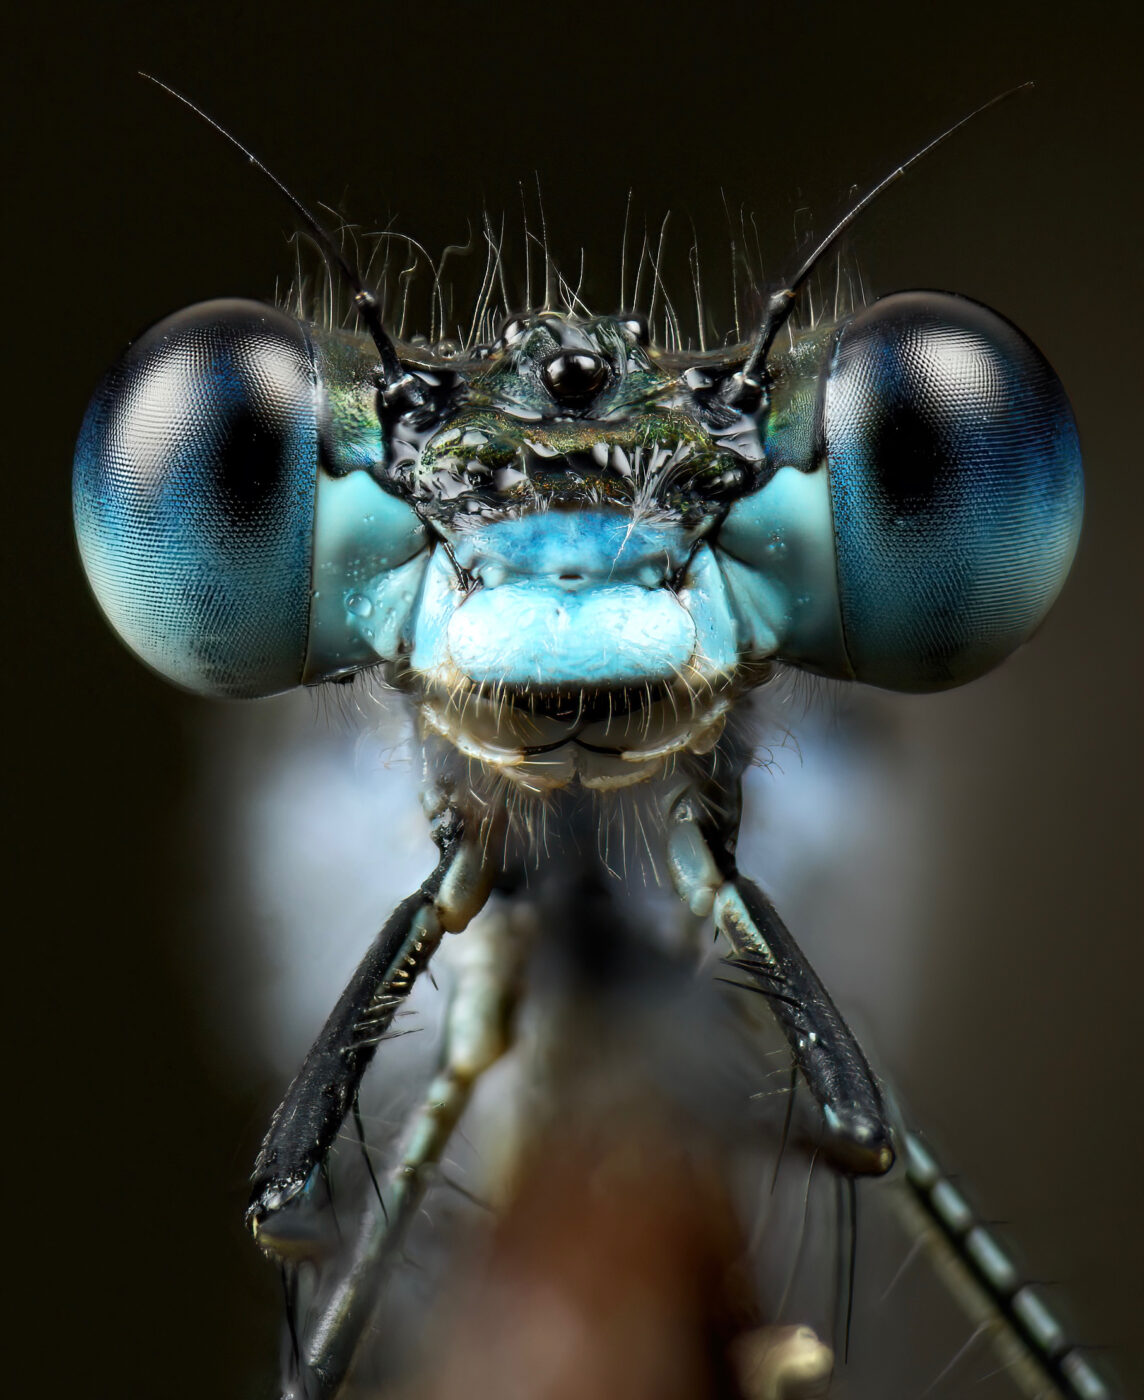 I went out at 4 AM to photograph emerald damselflies early in the morning by a mire on the Swedish island of Fårö. Although quite the task, I eventually managed to get a stacked portrait of this gorgeous male, with his stunning blue colouration.